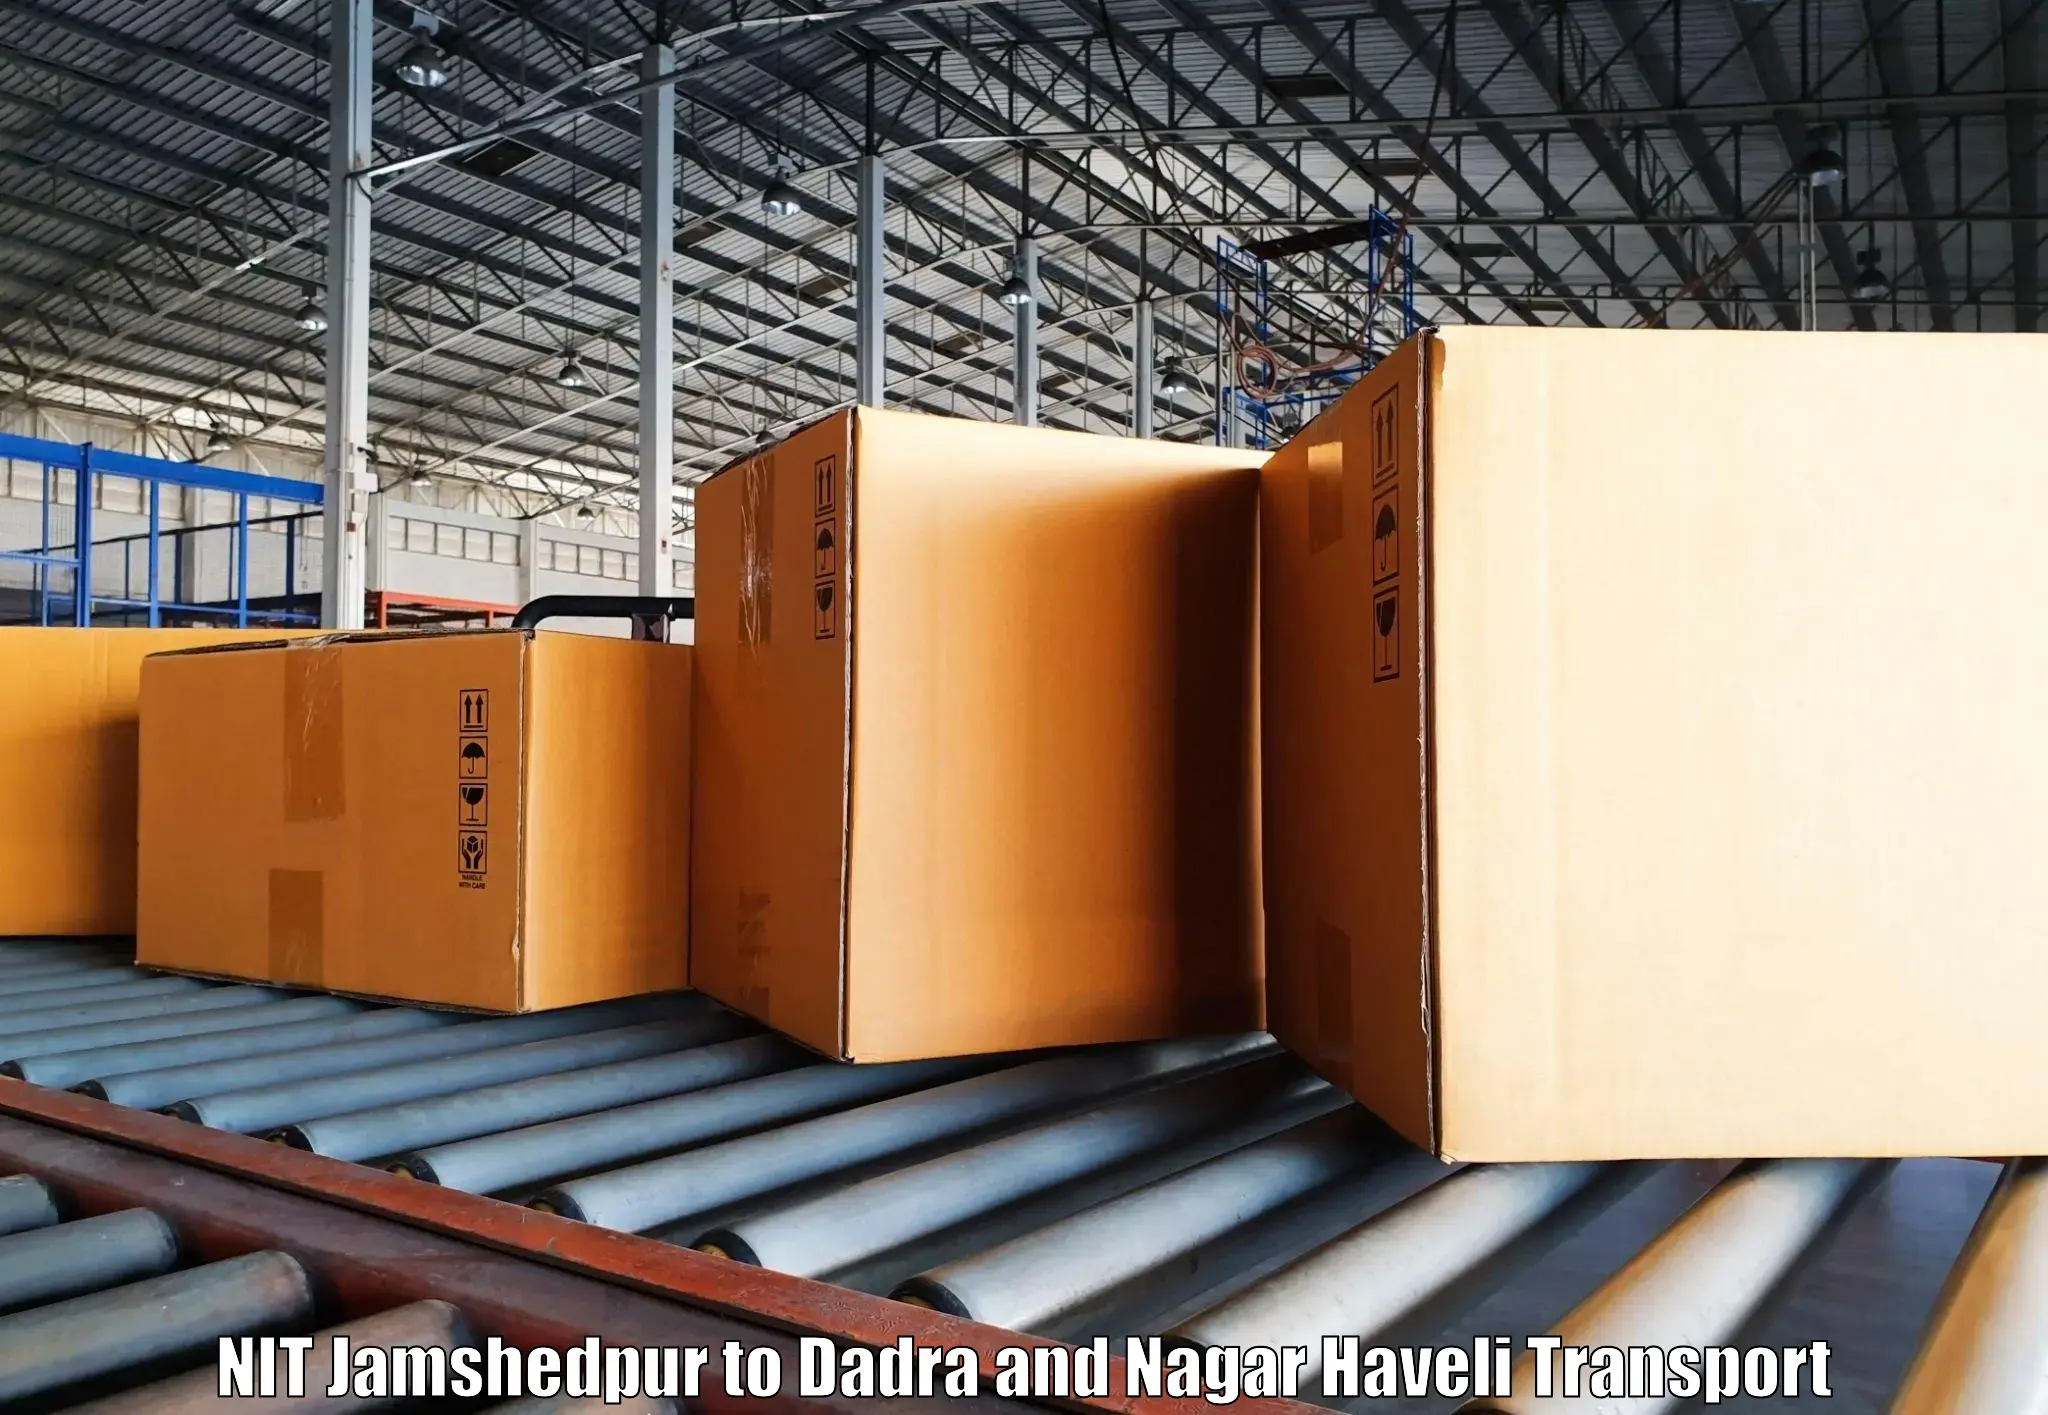 Daily parcel service transport in NIT Jamshedpur to Dadra and Nagar Haveli